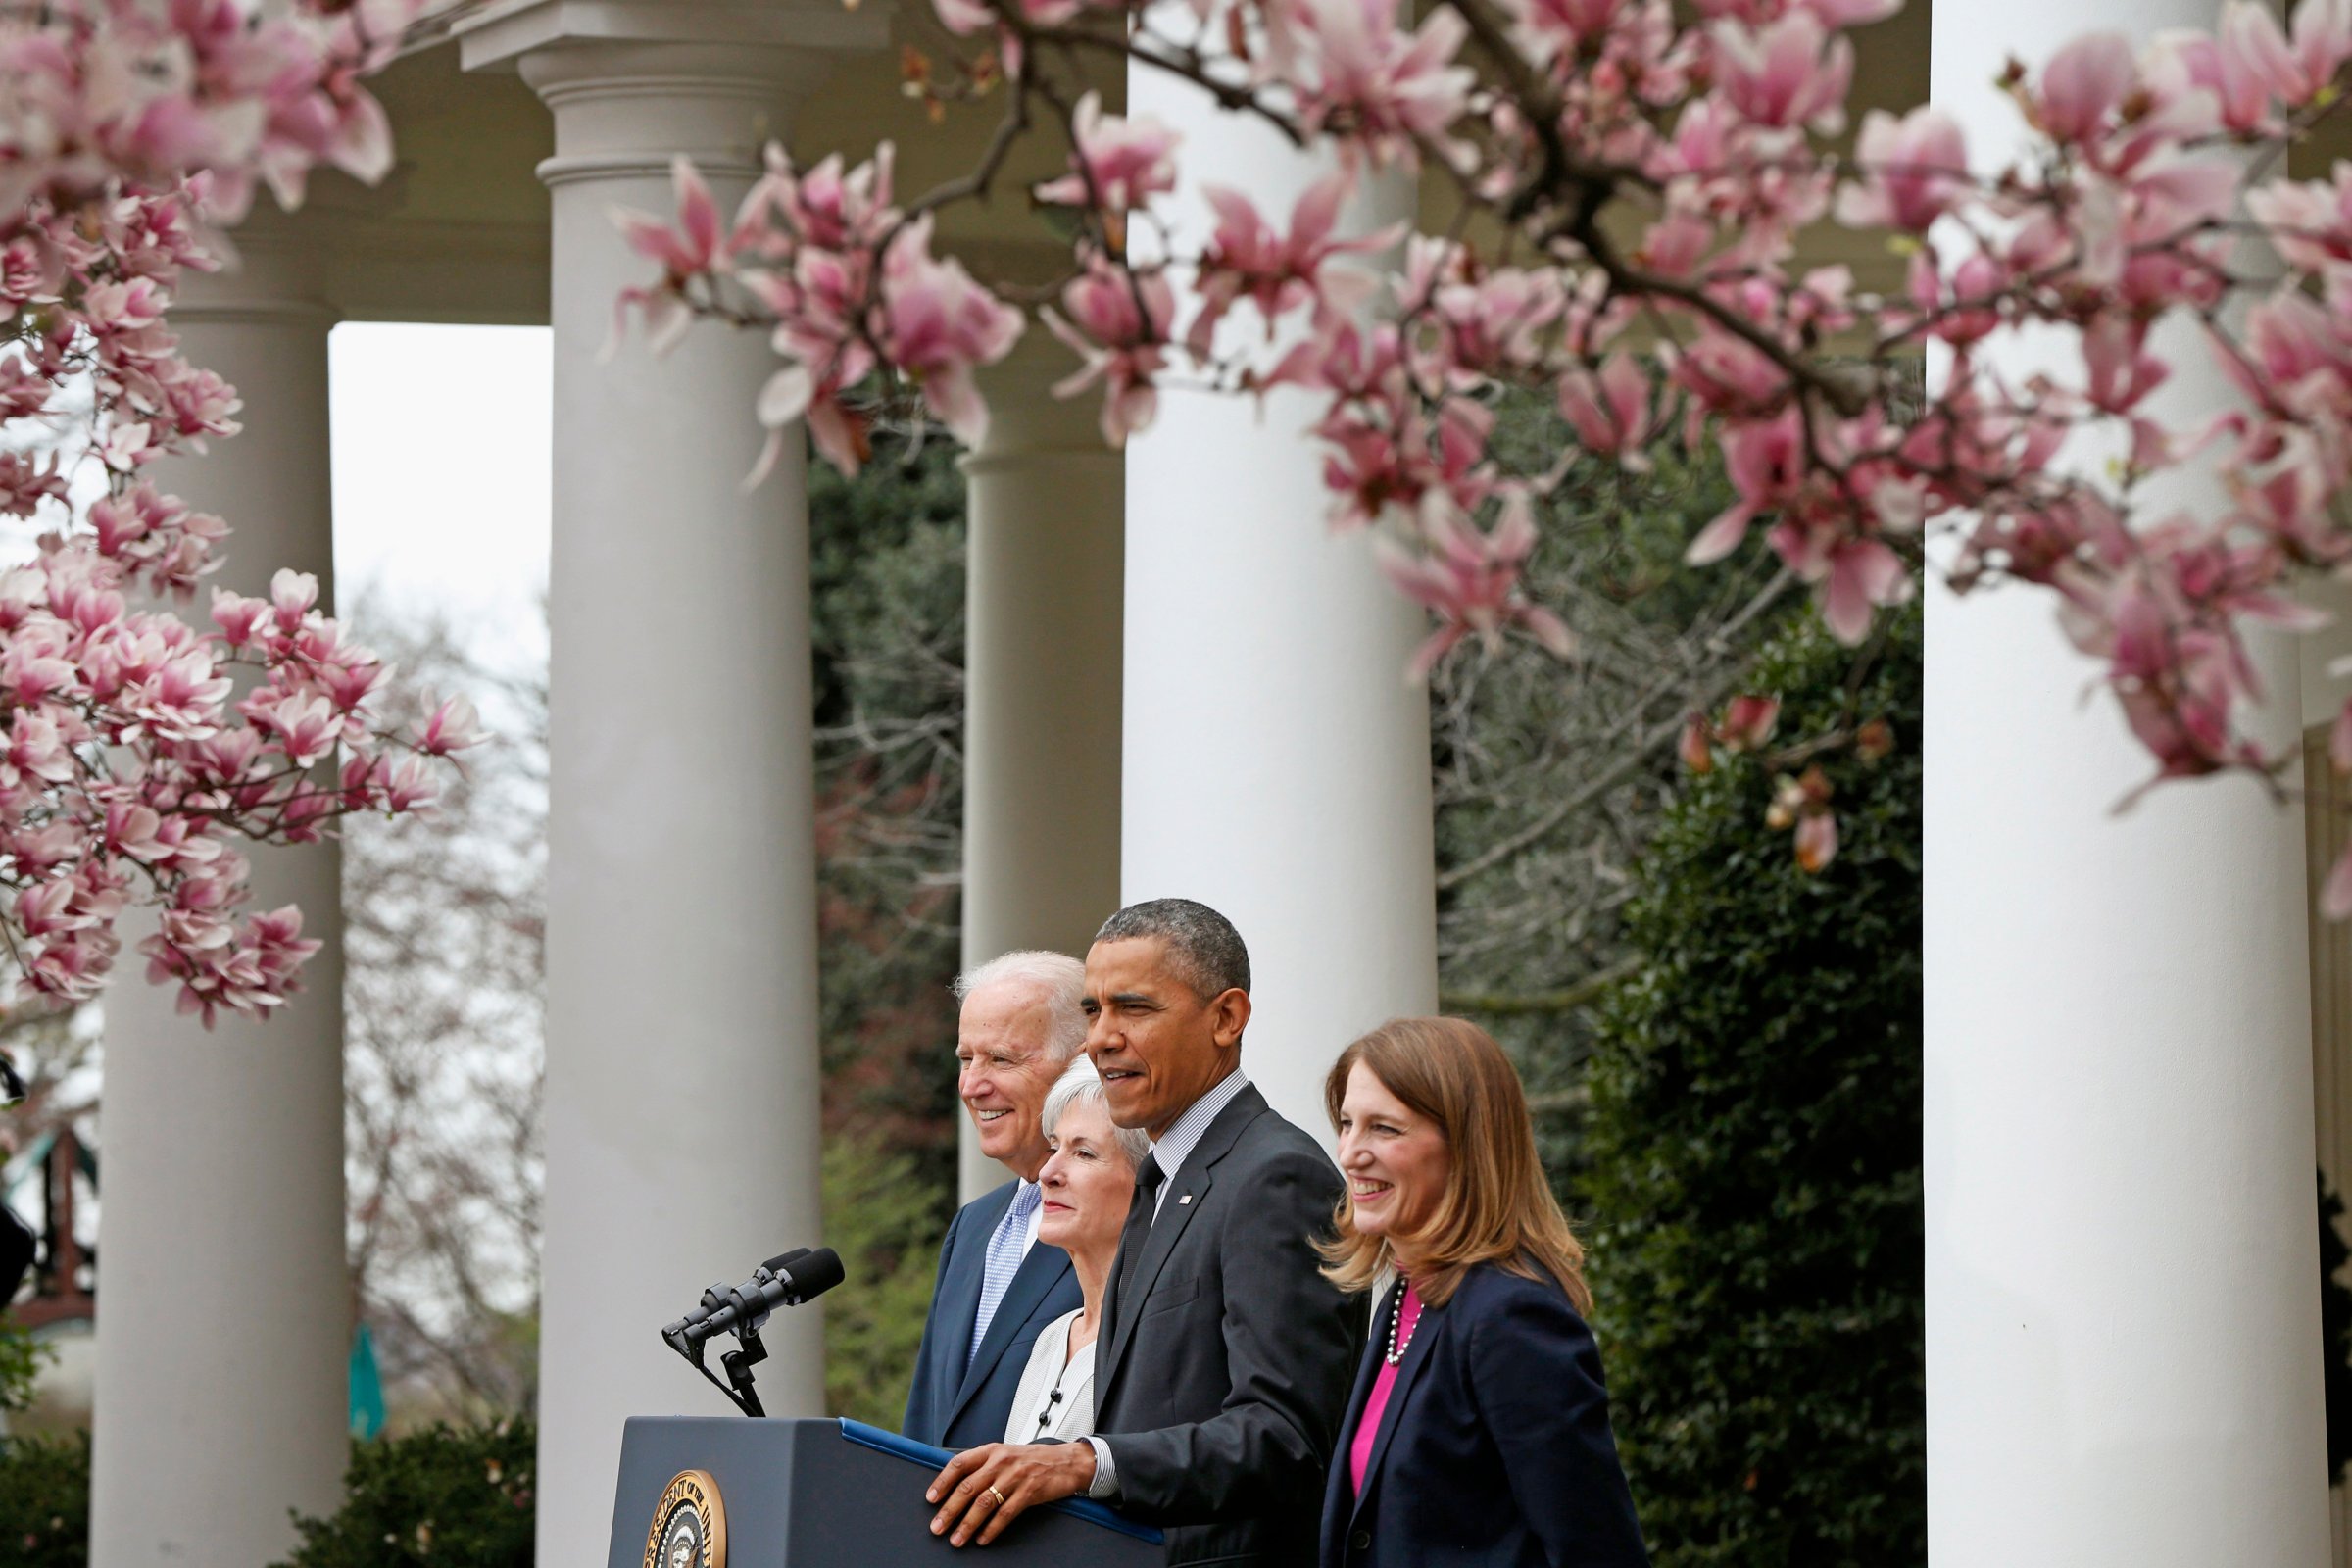 U.S. President Barack Obama and Vice President Joe Biden stand with outgoing Health and Human Services Secretary Kathleen Sebelius (second from left) and his nominee to be her replacement, Budget Director Sylvia Mathews Burwell in the Rose Garden of the White House in Washington, D.C., on April 11, 2014.